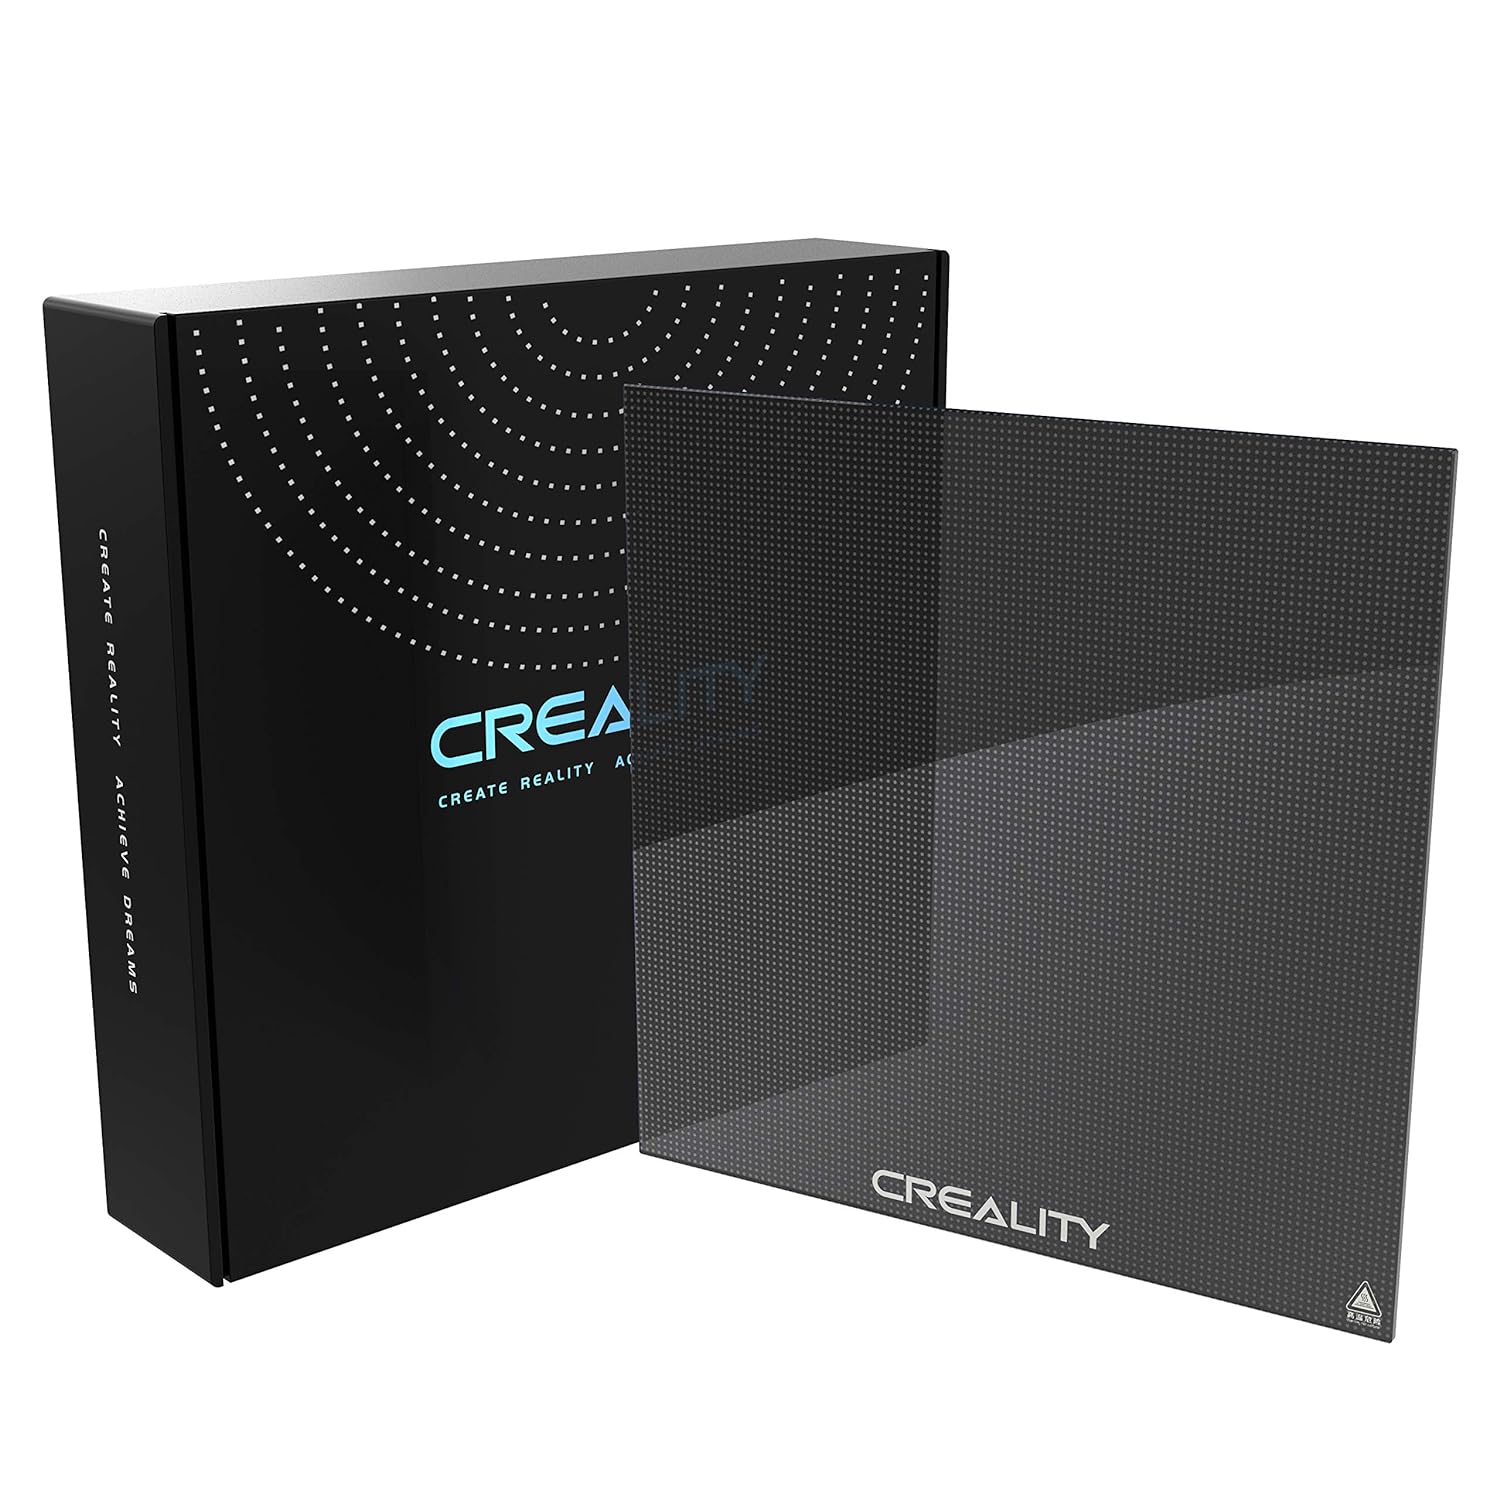 creality-ender-3-glass-bed-upgraded-build-surface-plate-235x235x4mm Creality Ender 3 Glass Bed Review